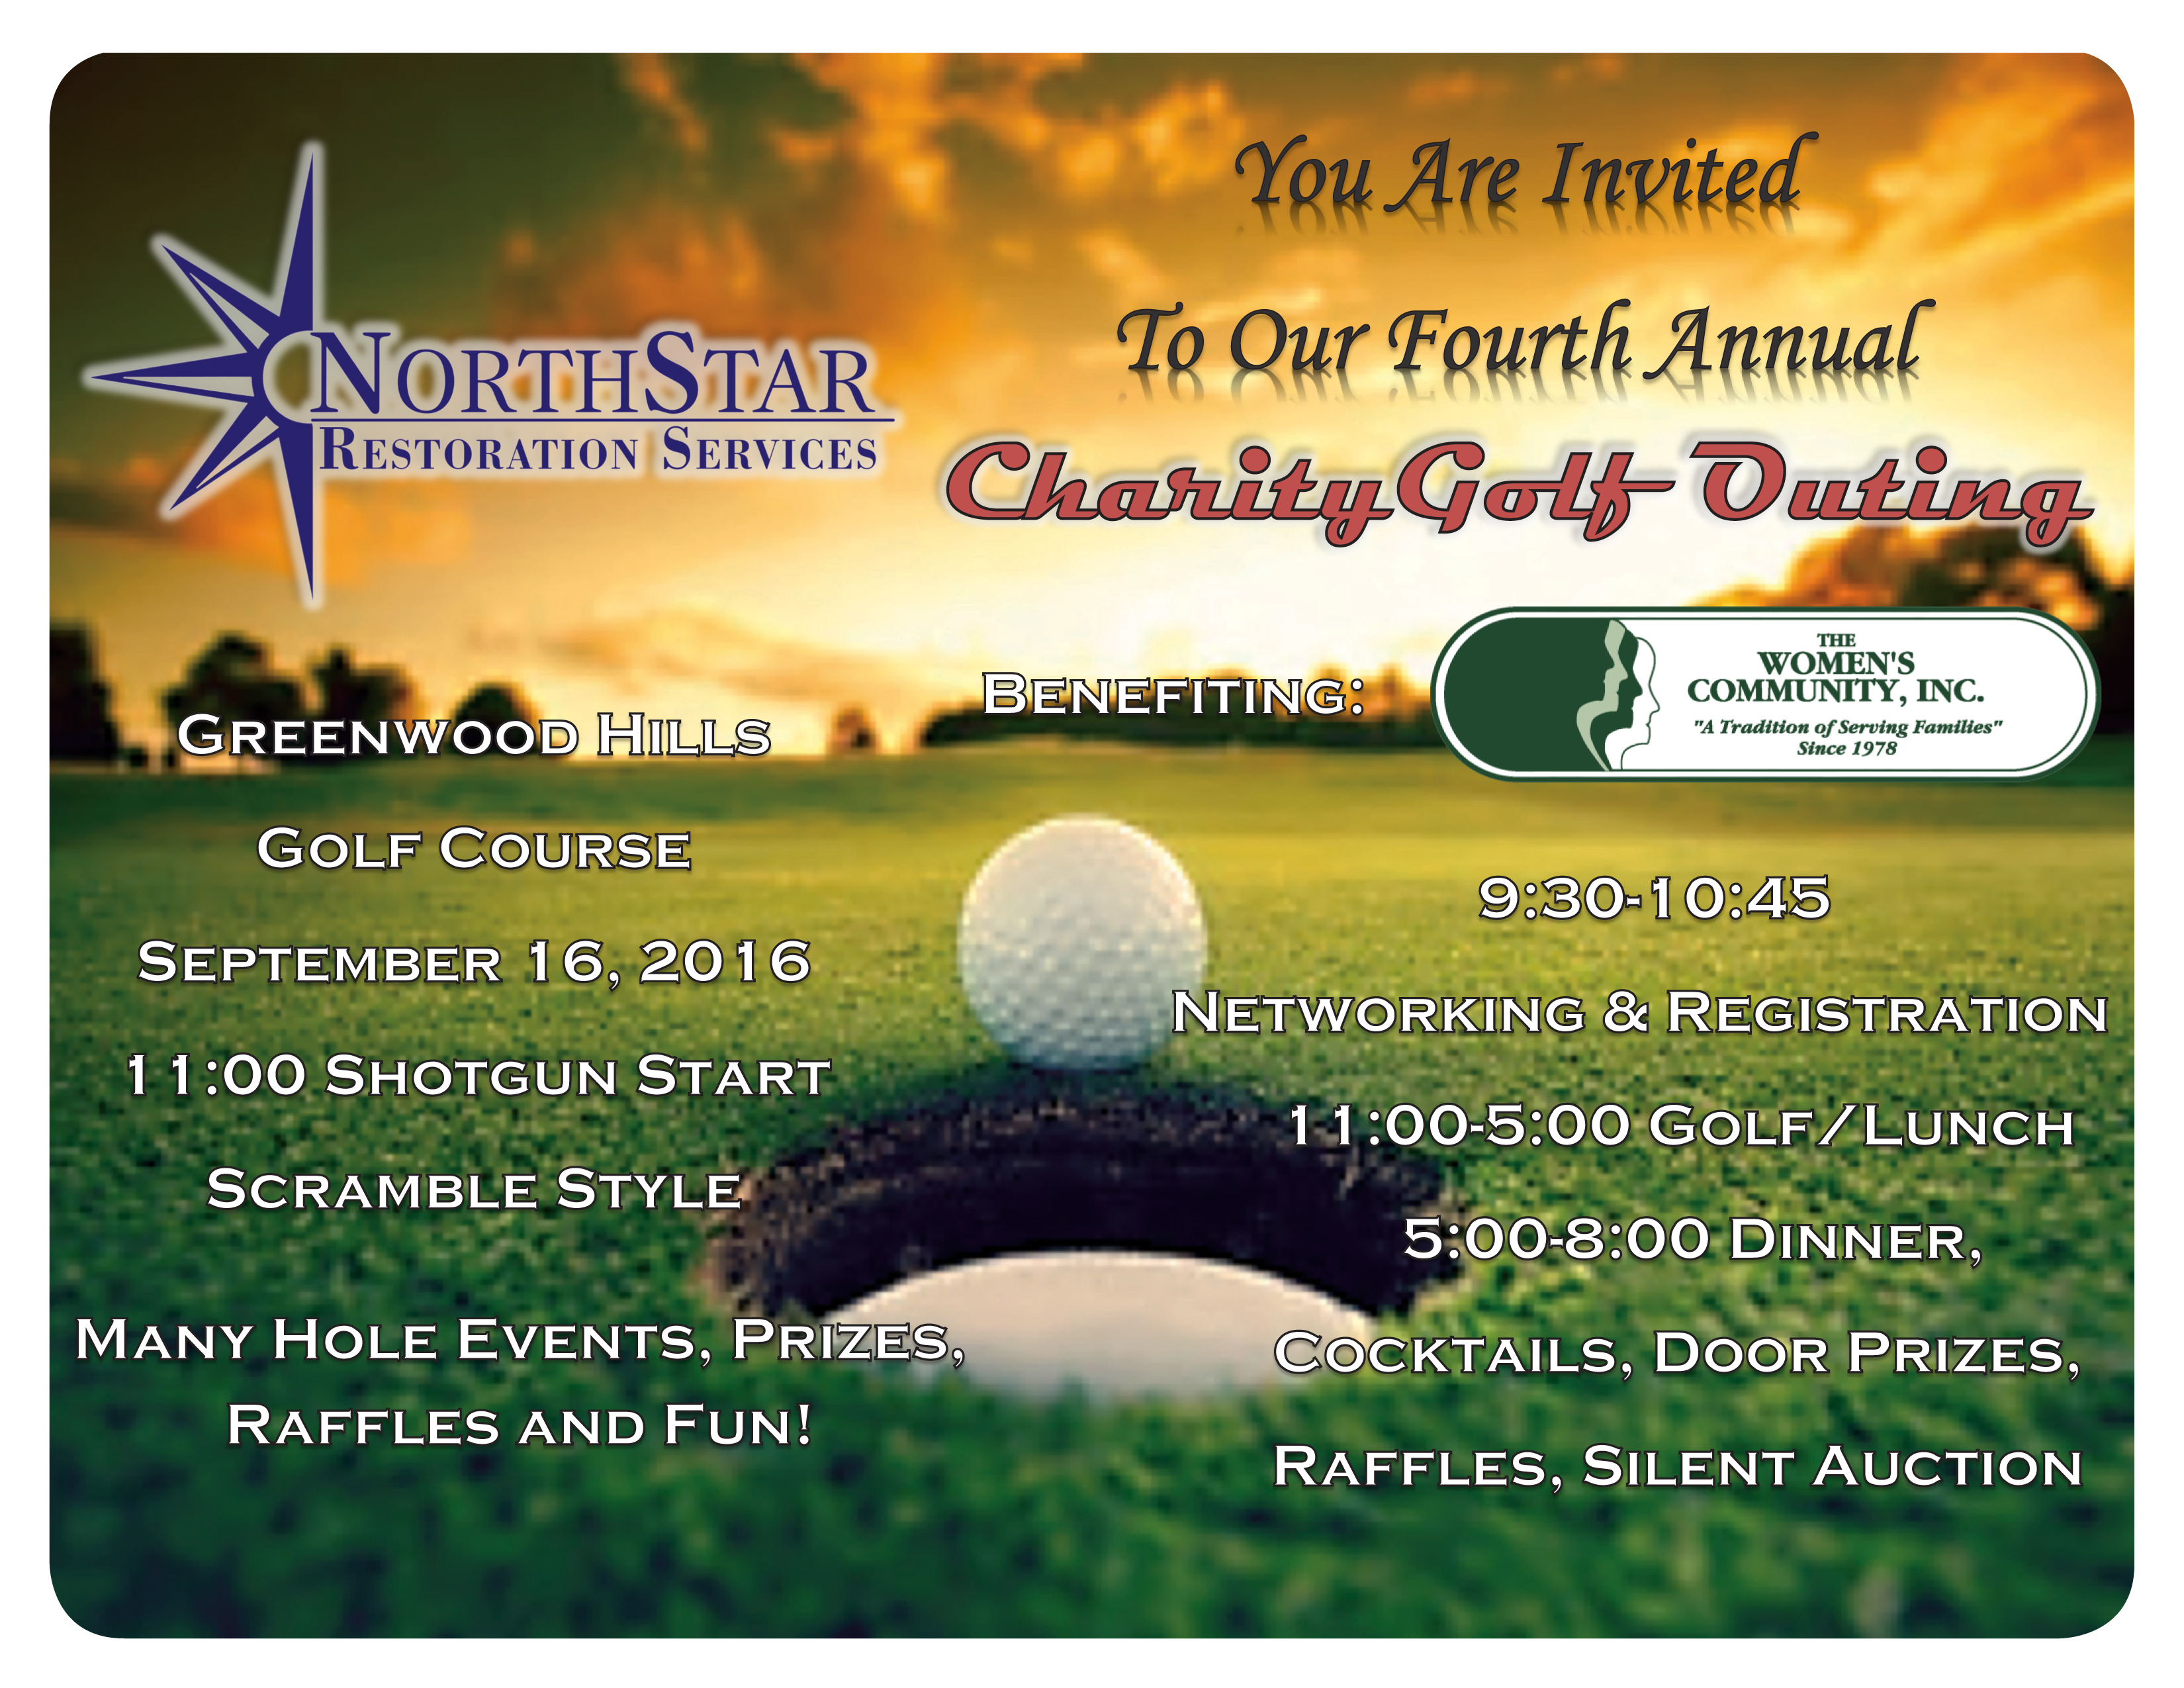 NorthStar Golf Outing Poster1 copy